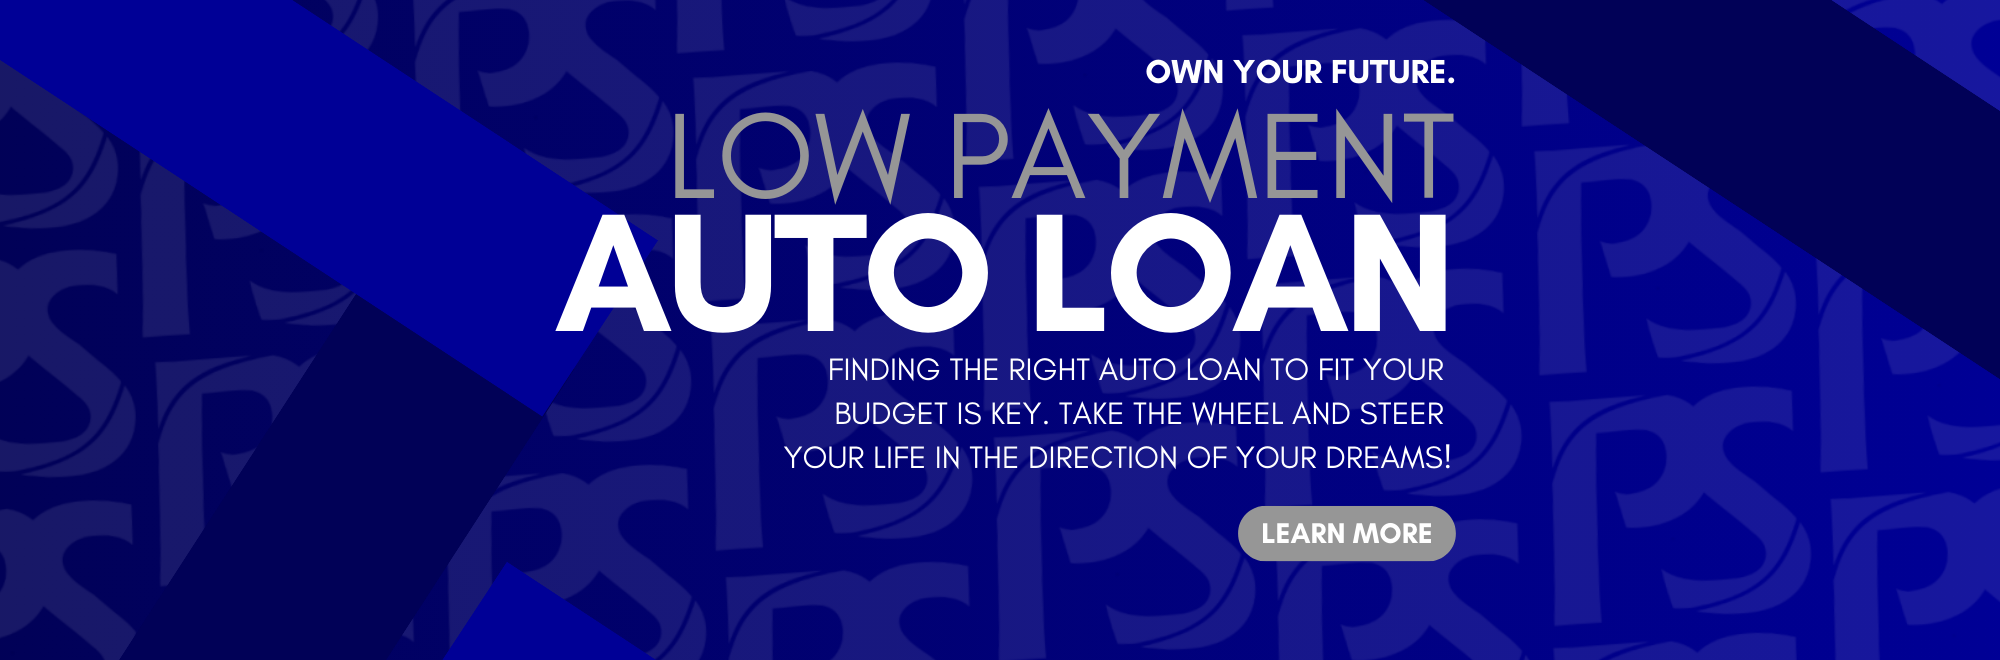 Own your Future. Low Payment Auto Loans. FINDING THRE RIGHT AUTO LOAN TO FIT YOUR BUDGET IS KEY. Take the wheel and steer your life in the direction of your dreams!